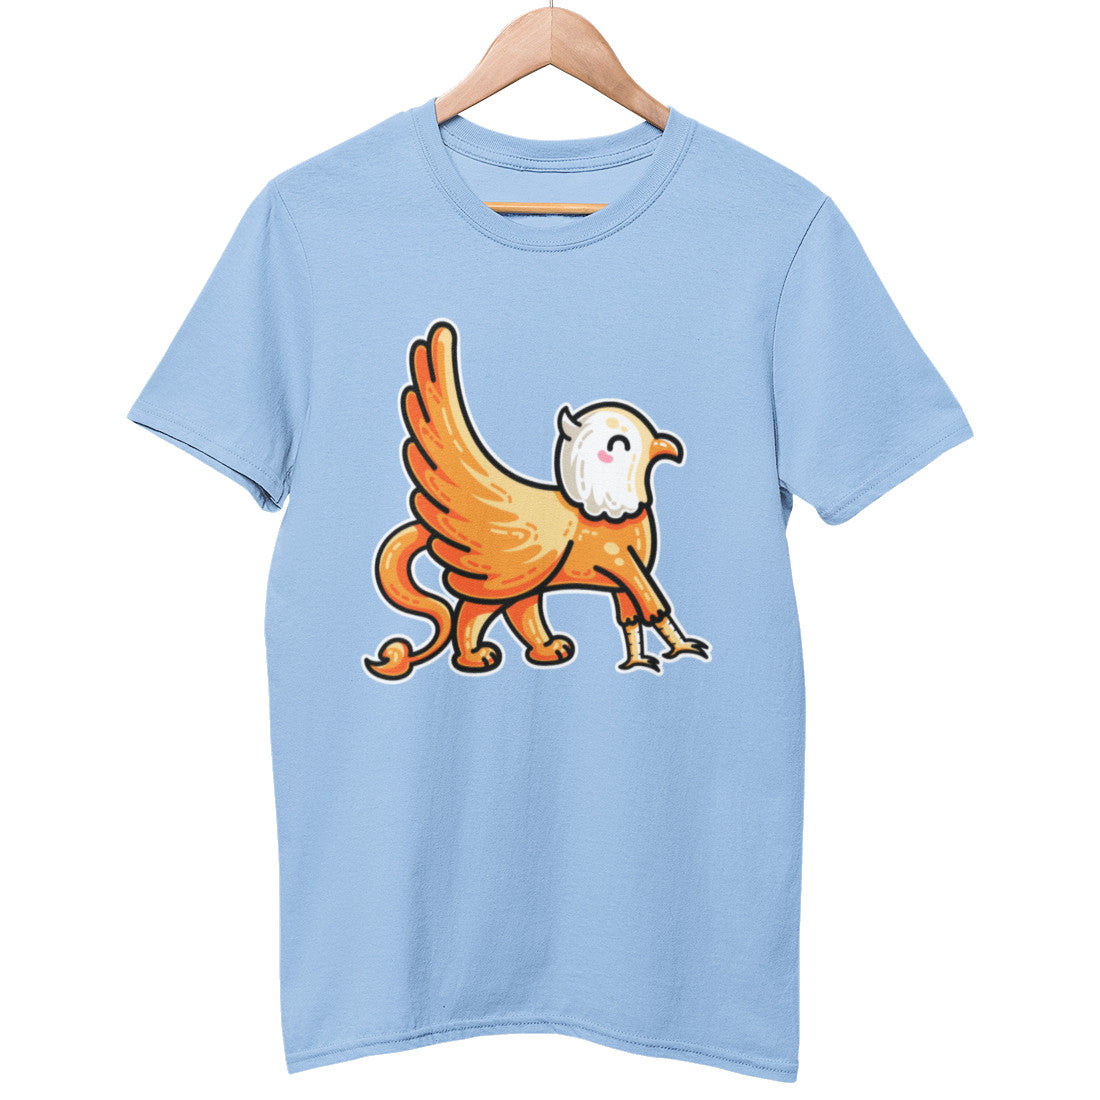 A light sky blue colour unisex crewneck t-shirt on a hanger with a design on its chest of a kawaii cute orange and white griffin with wings furled and seen side on walking across the t-shirt from left to right